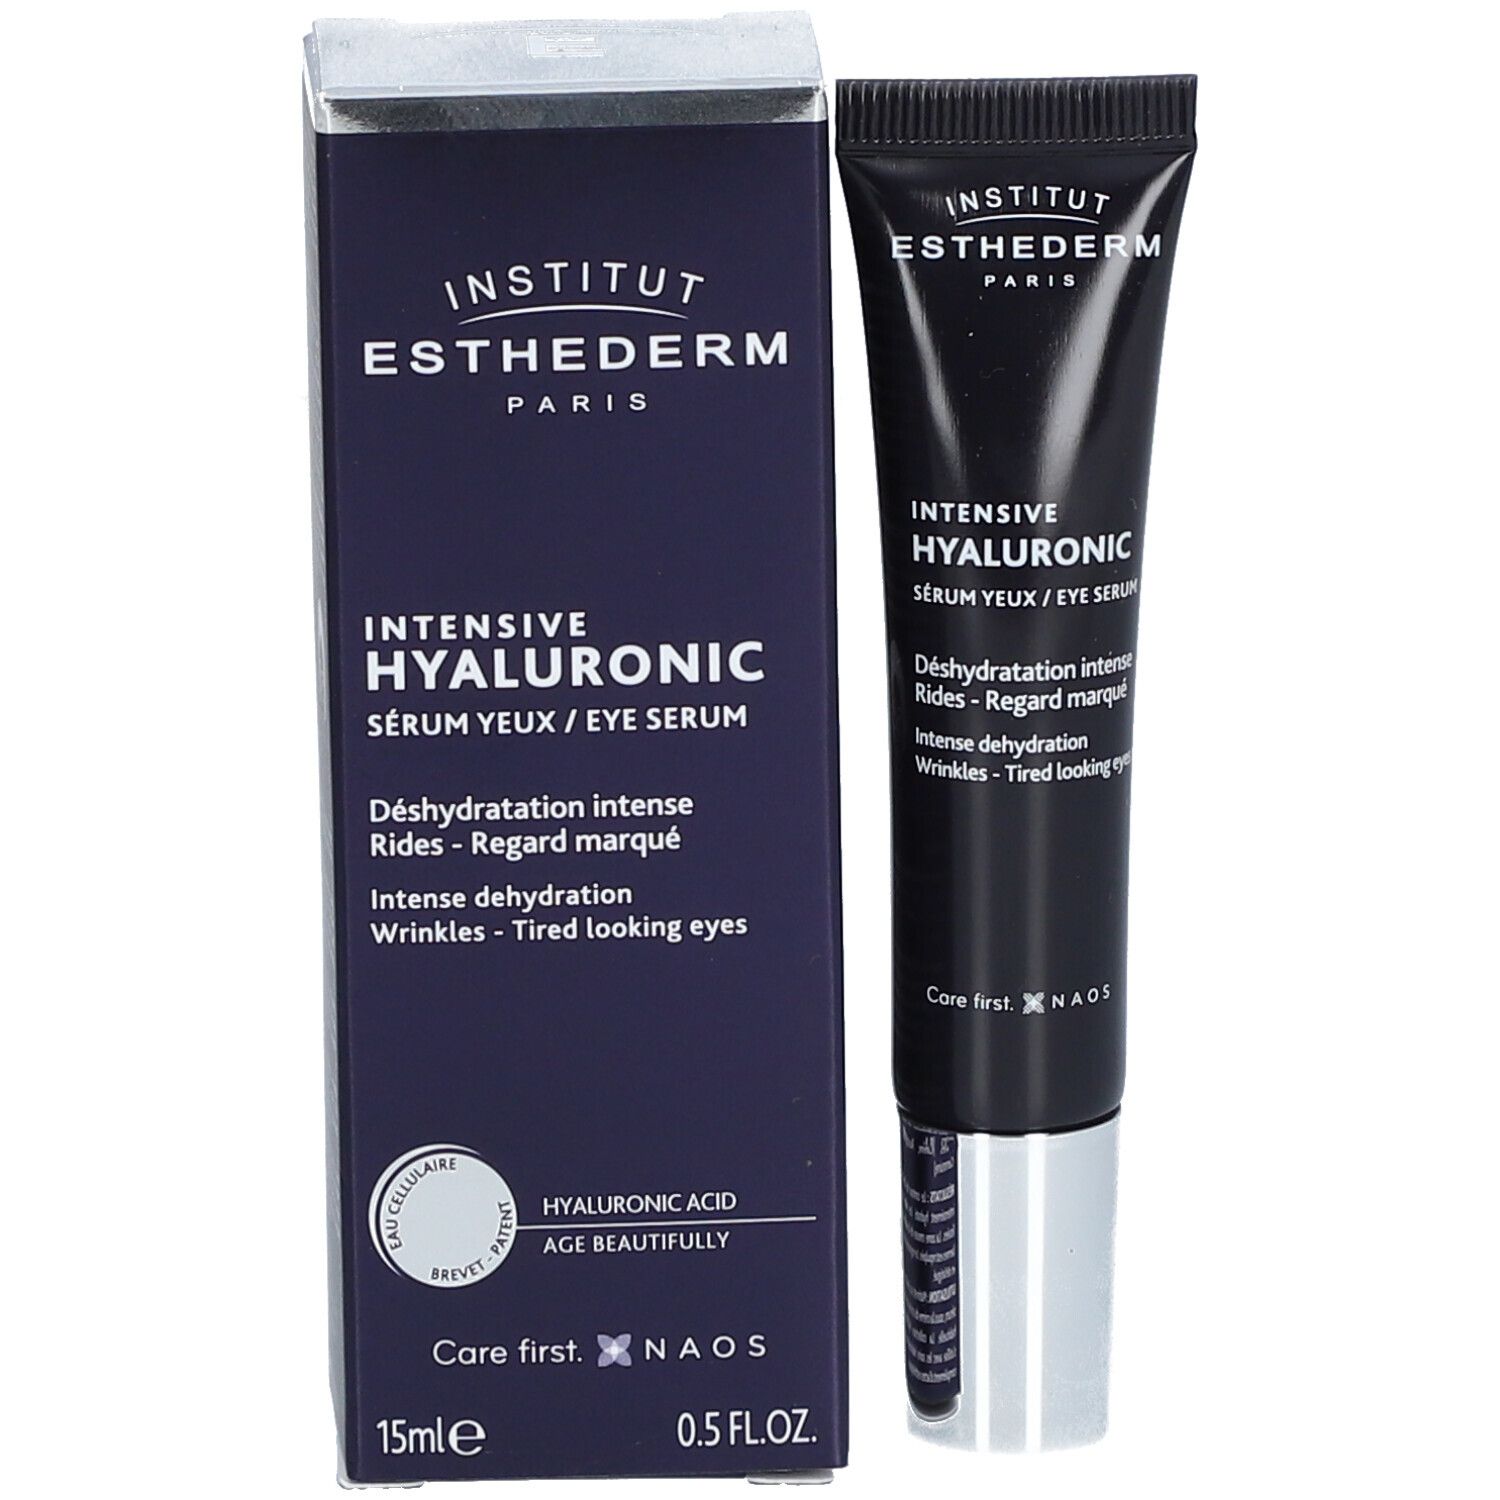 Institut Esthederm Intensive Hyaluronic Sérum yeux